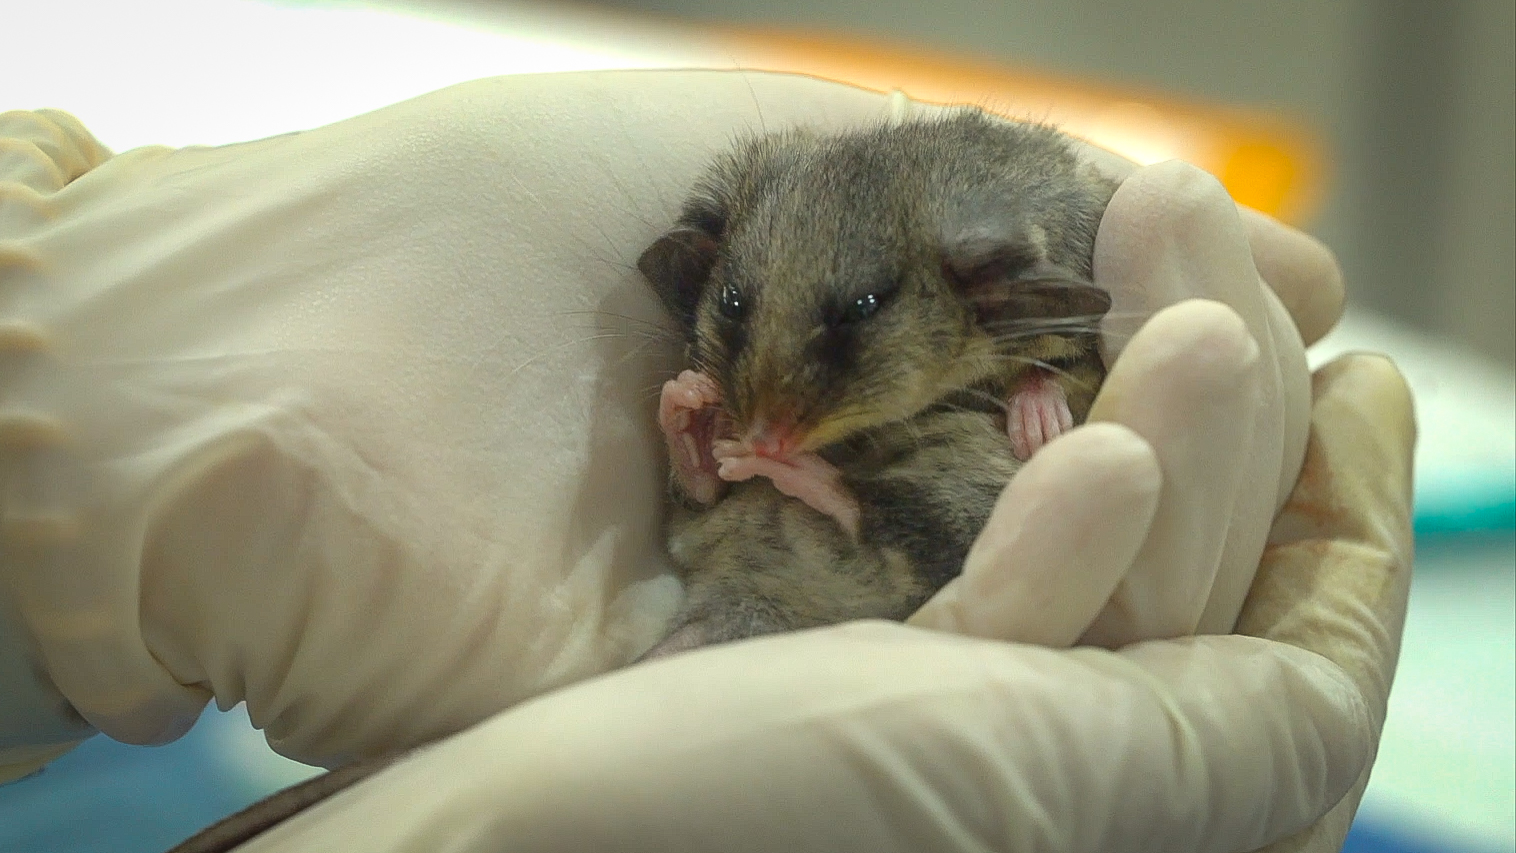 Somehow when you track a mountain pygmy possum down by drone and give it a health check one of the cutest animals on Earth starts to look a scheme Montgomery Burns